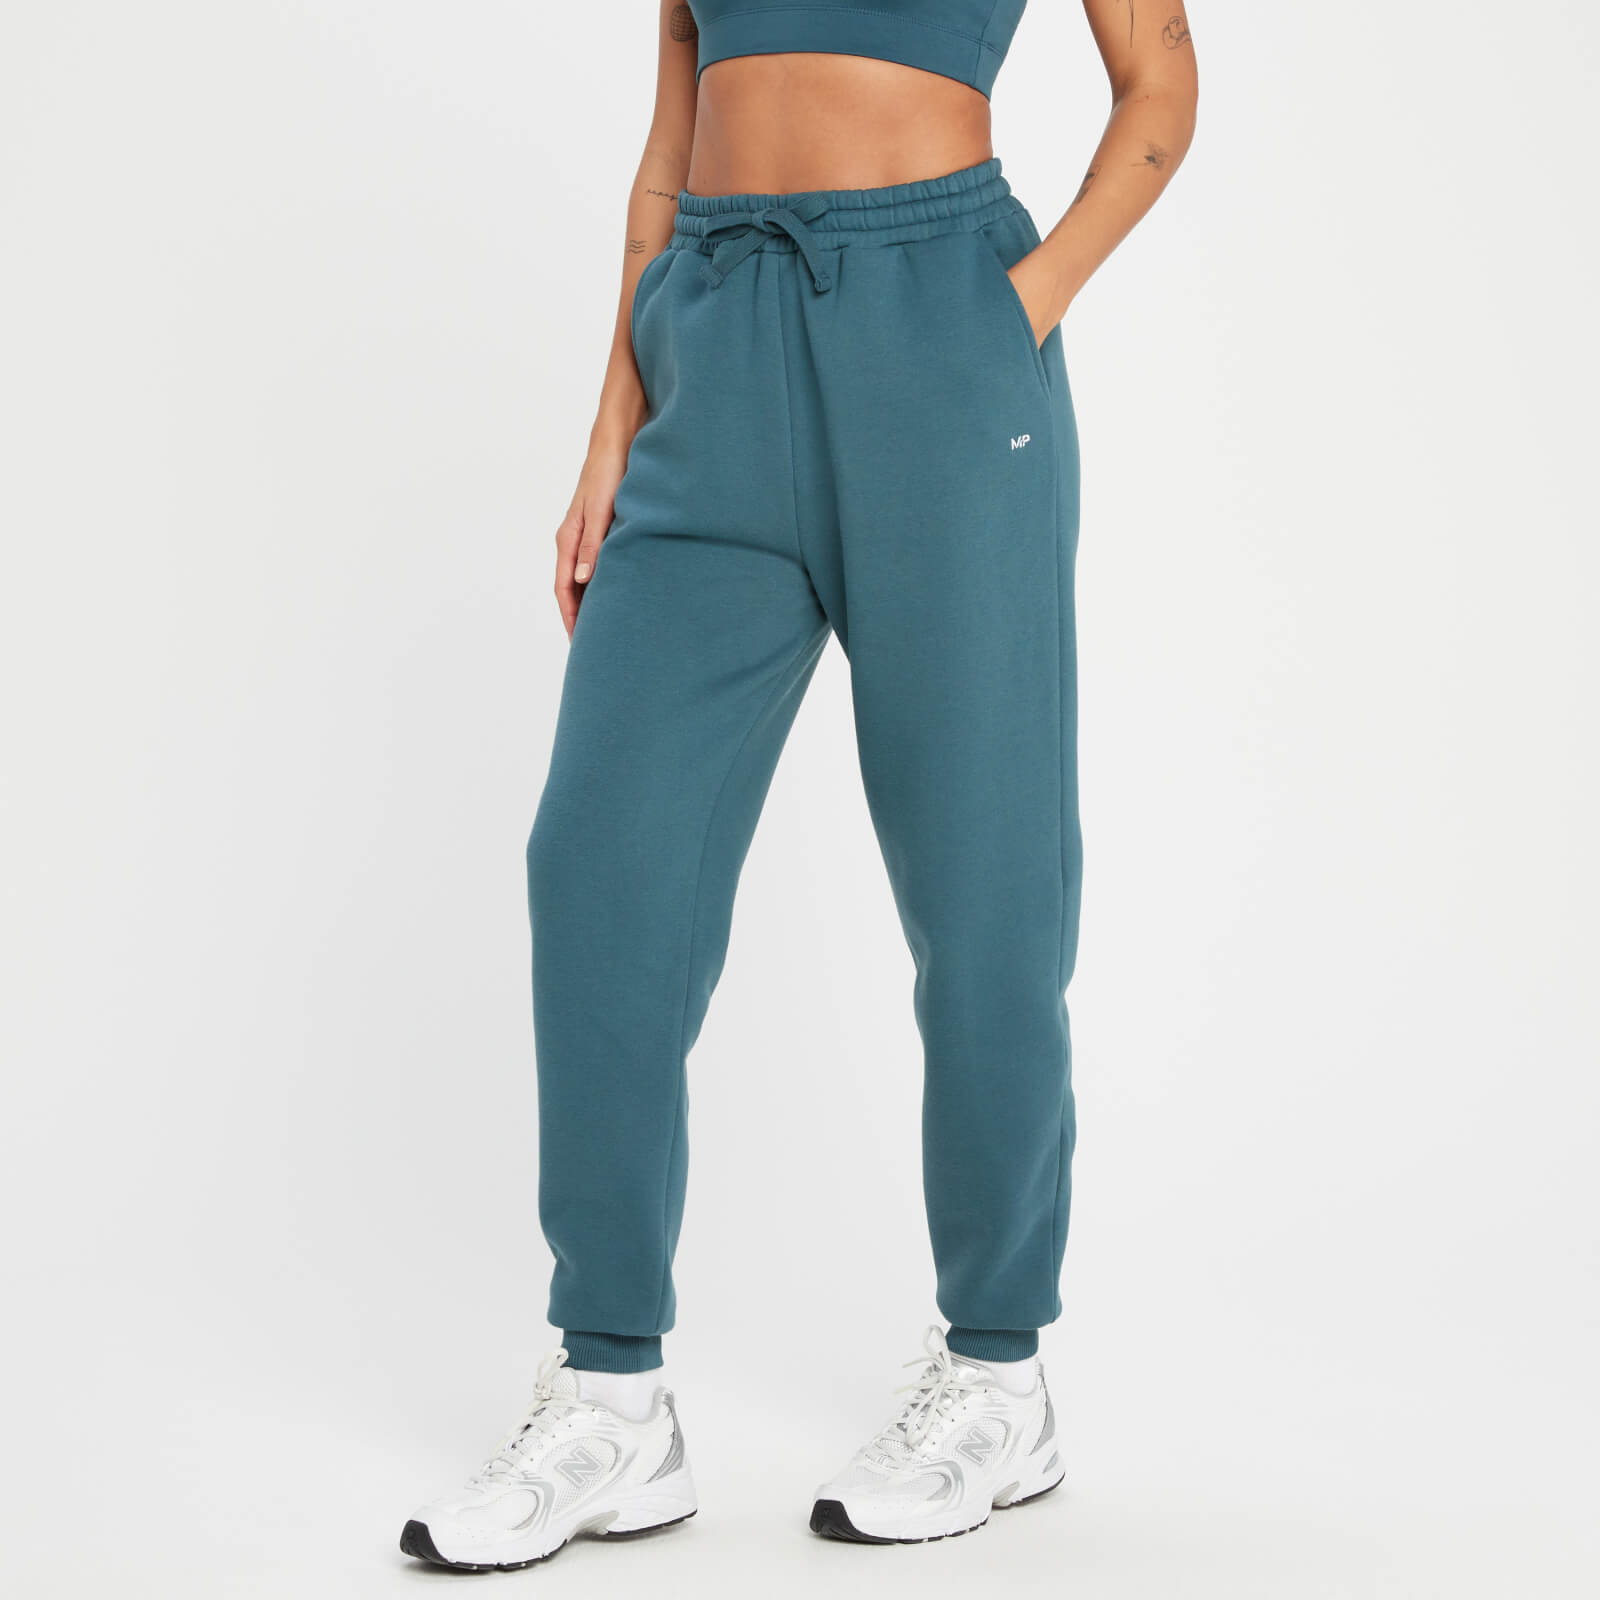 MP Women's Rest Day Relaxed Fit Joggers - Smoke Blue - XS